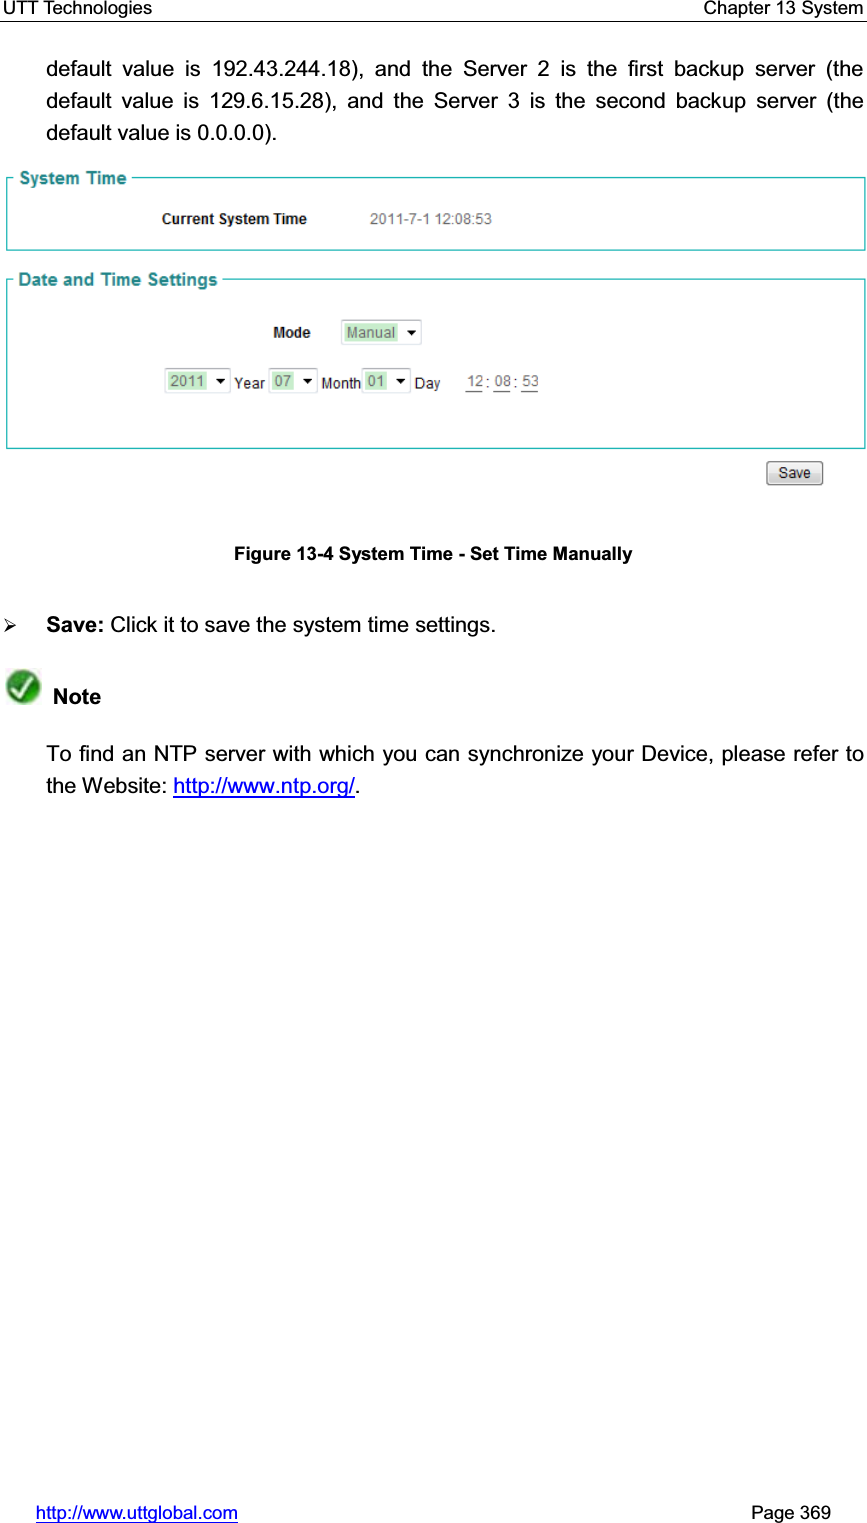 UTT Technologies    Chapter 13 System   http://www.uttglobal.com                                                       Page 369 default value is 192.43.244.18), and the Server 2 is the first backup server (the default value is 129.6.15.28), and the Server 3 is the second backup server (the default value is 0.0.0.0). Figure 13-4 System Time - Set Time Manually ¾Save: Click it to save the system time settings.NoteTo find an NTP server with which you can synchronize your Device, please refer to the Website: http://www.ntp.org/.